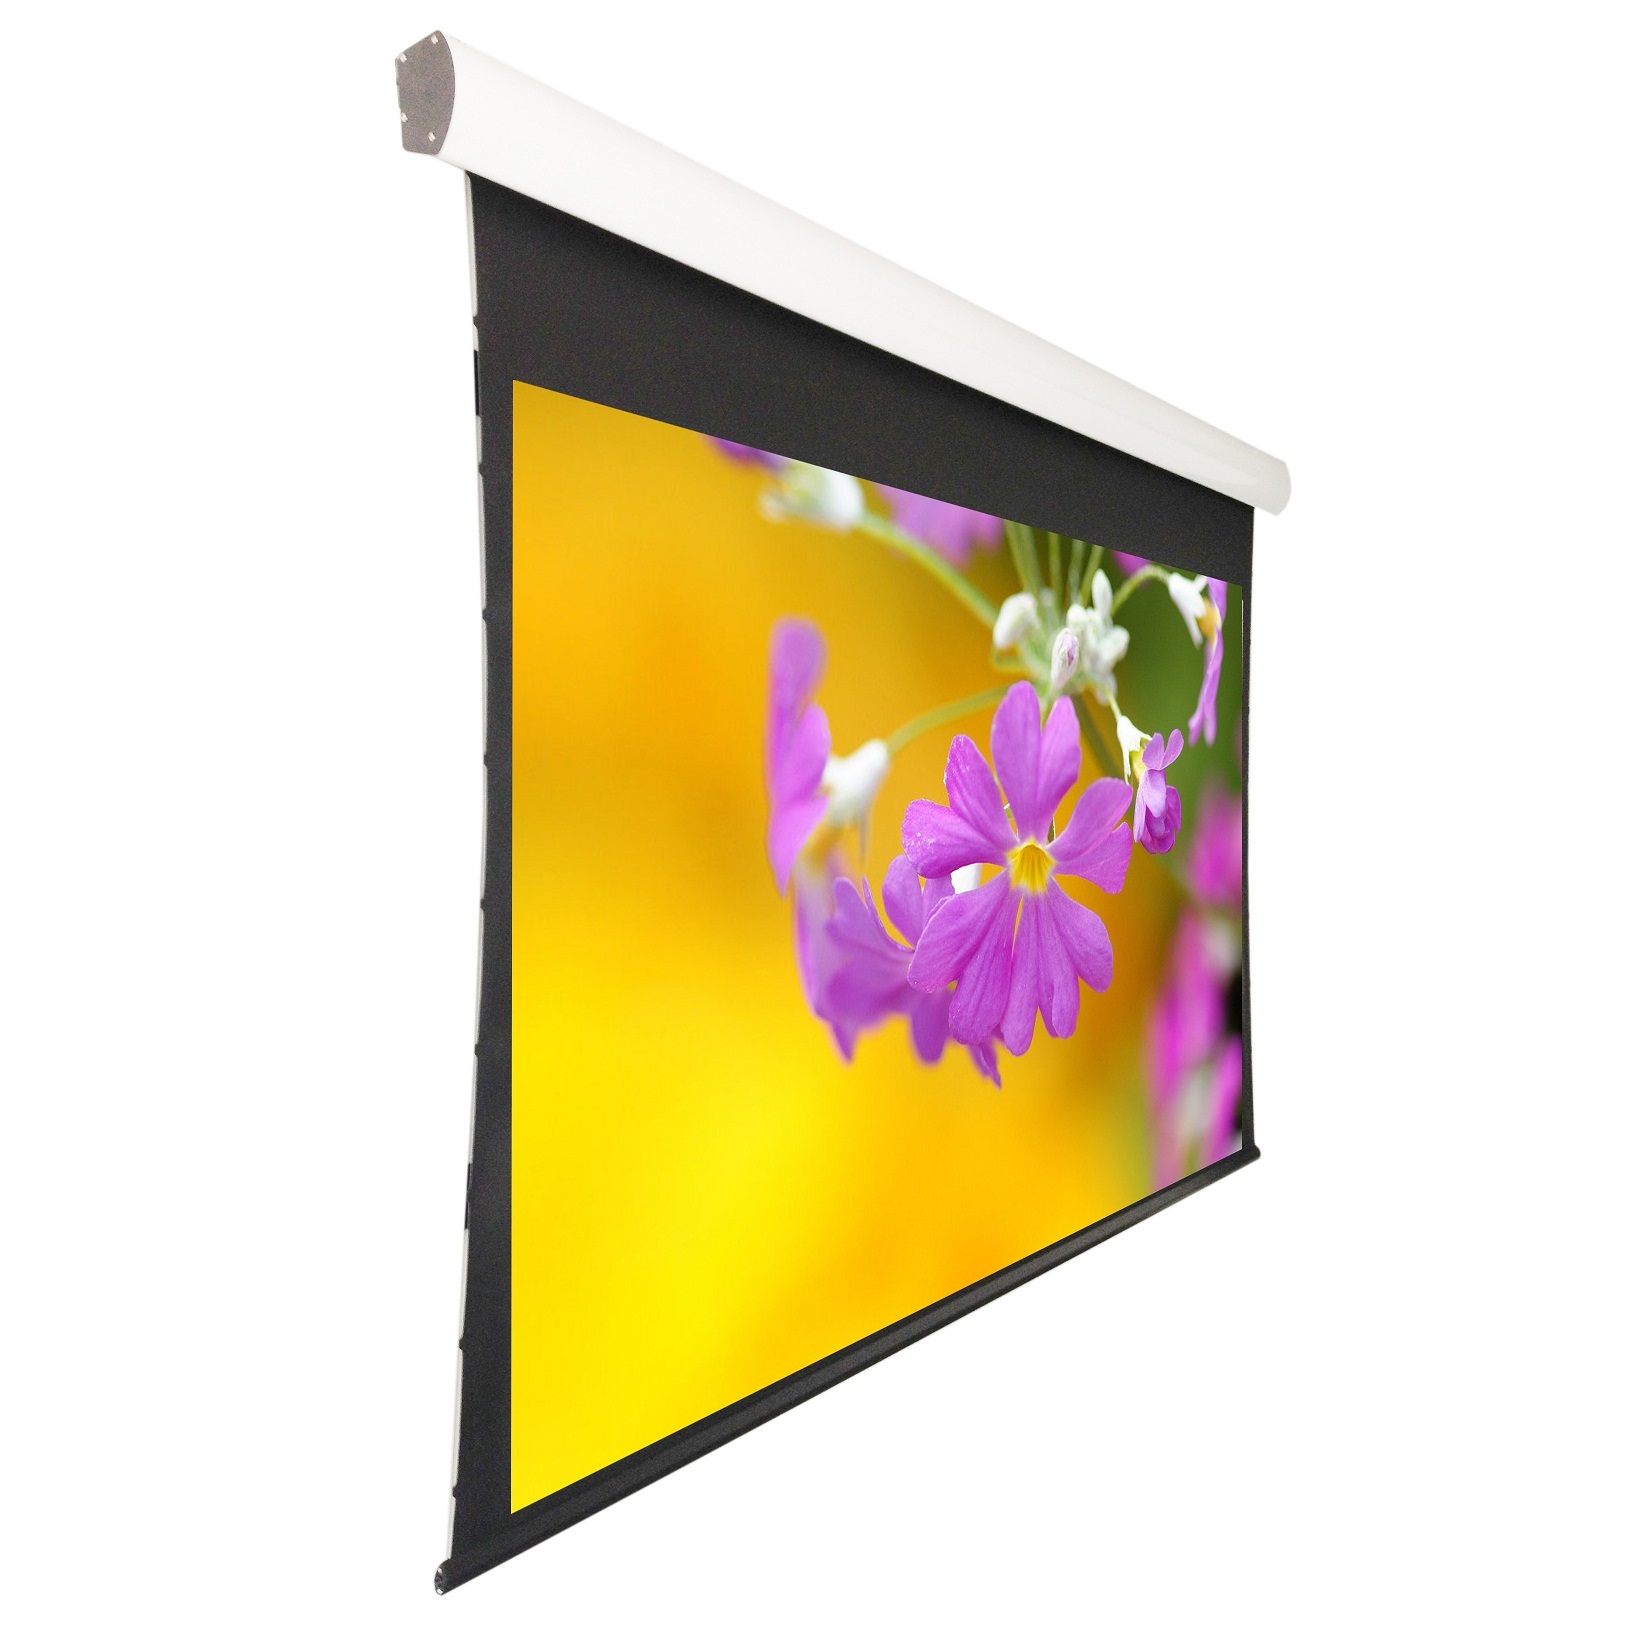  Screen Electric Projector Screen Wall Ceiling Mounted projection screen 